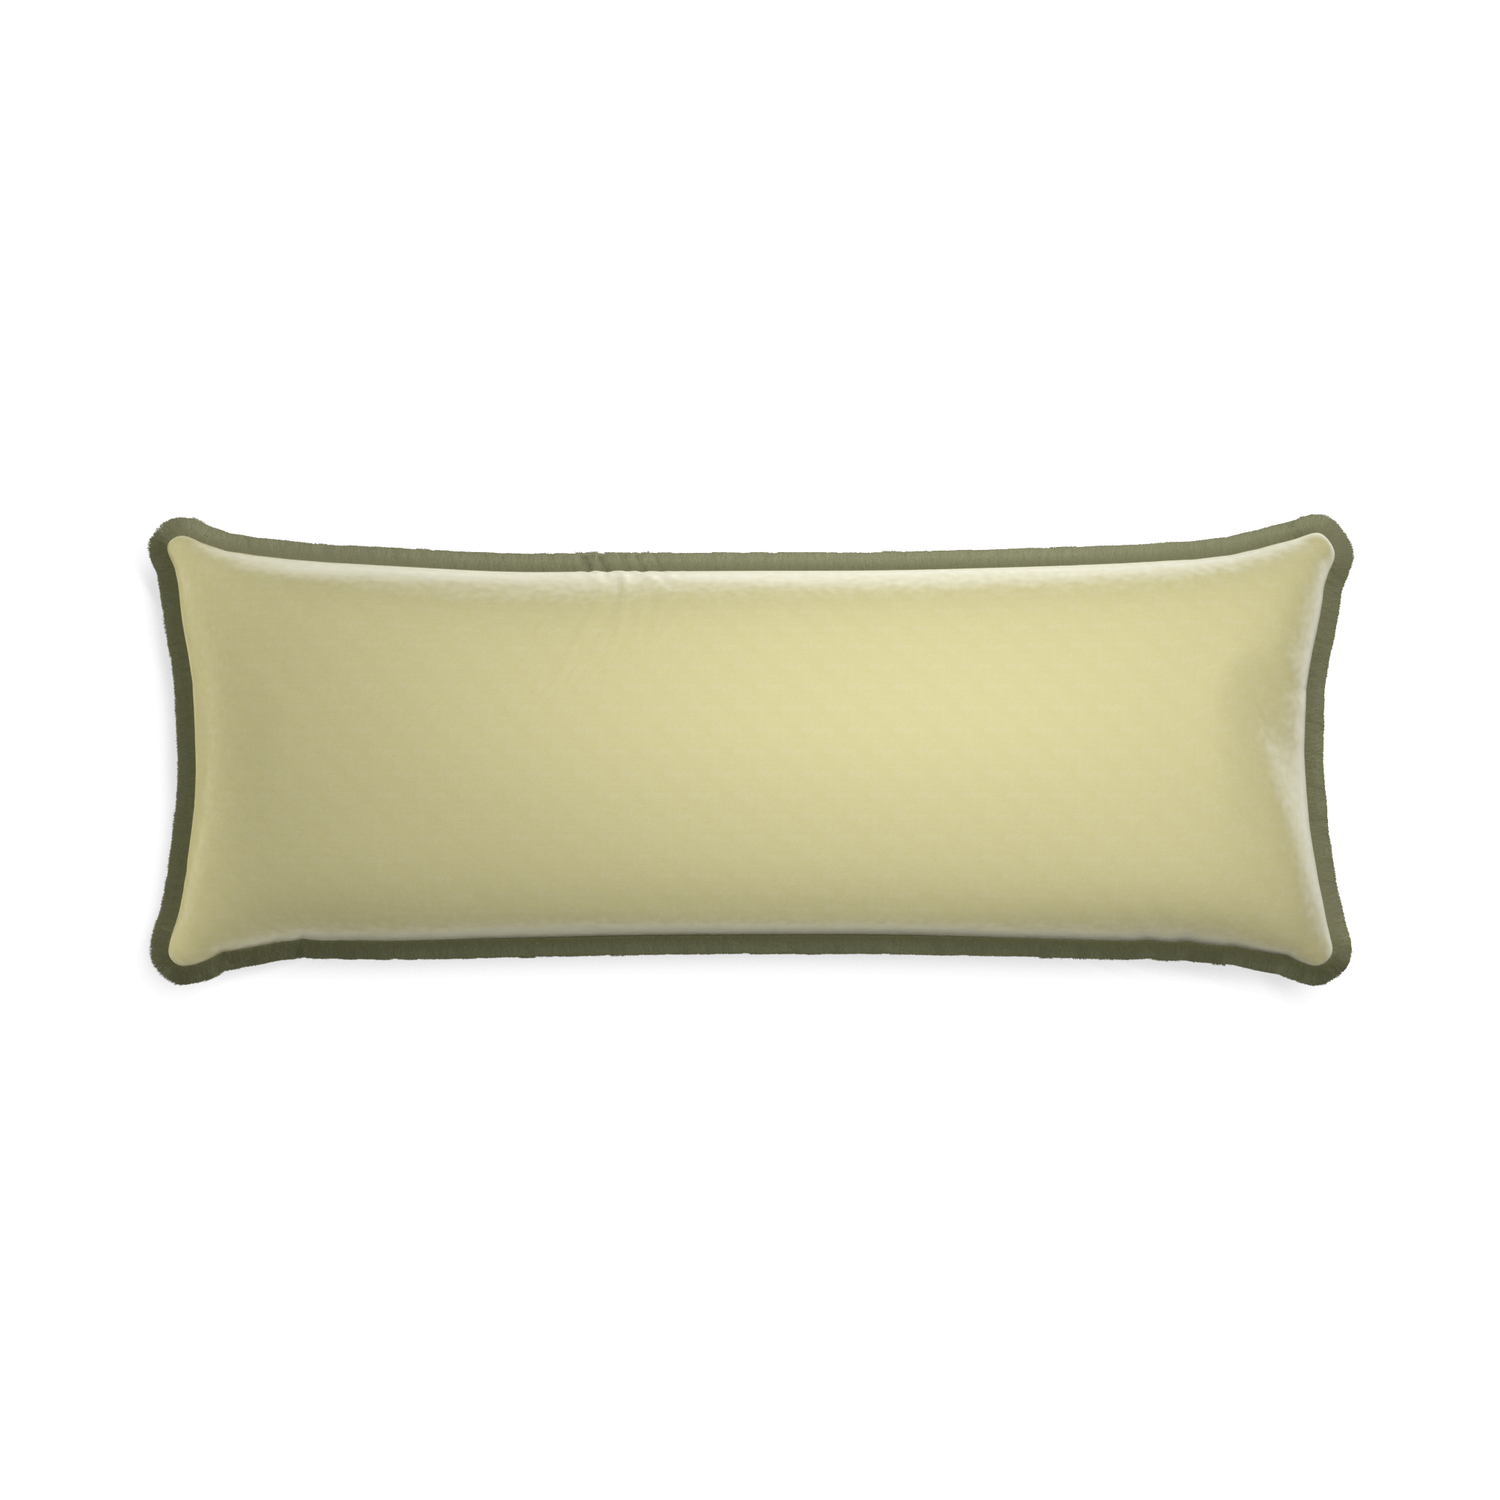 rectangle light green pillow with sage green fringe